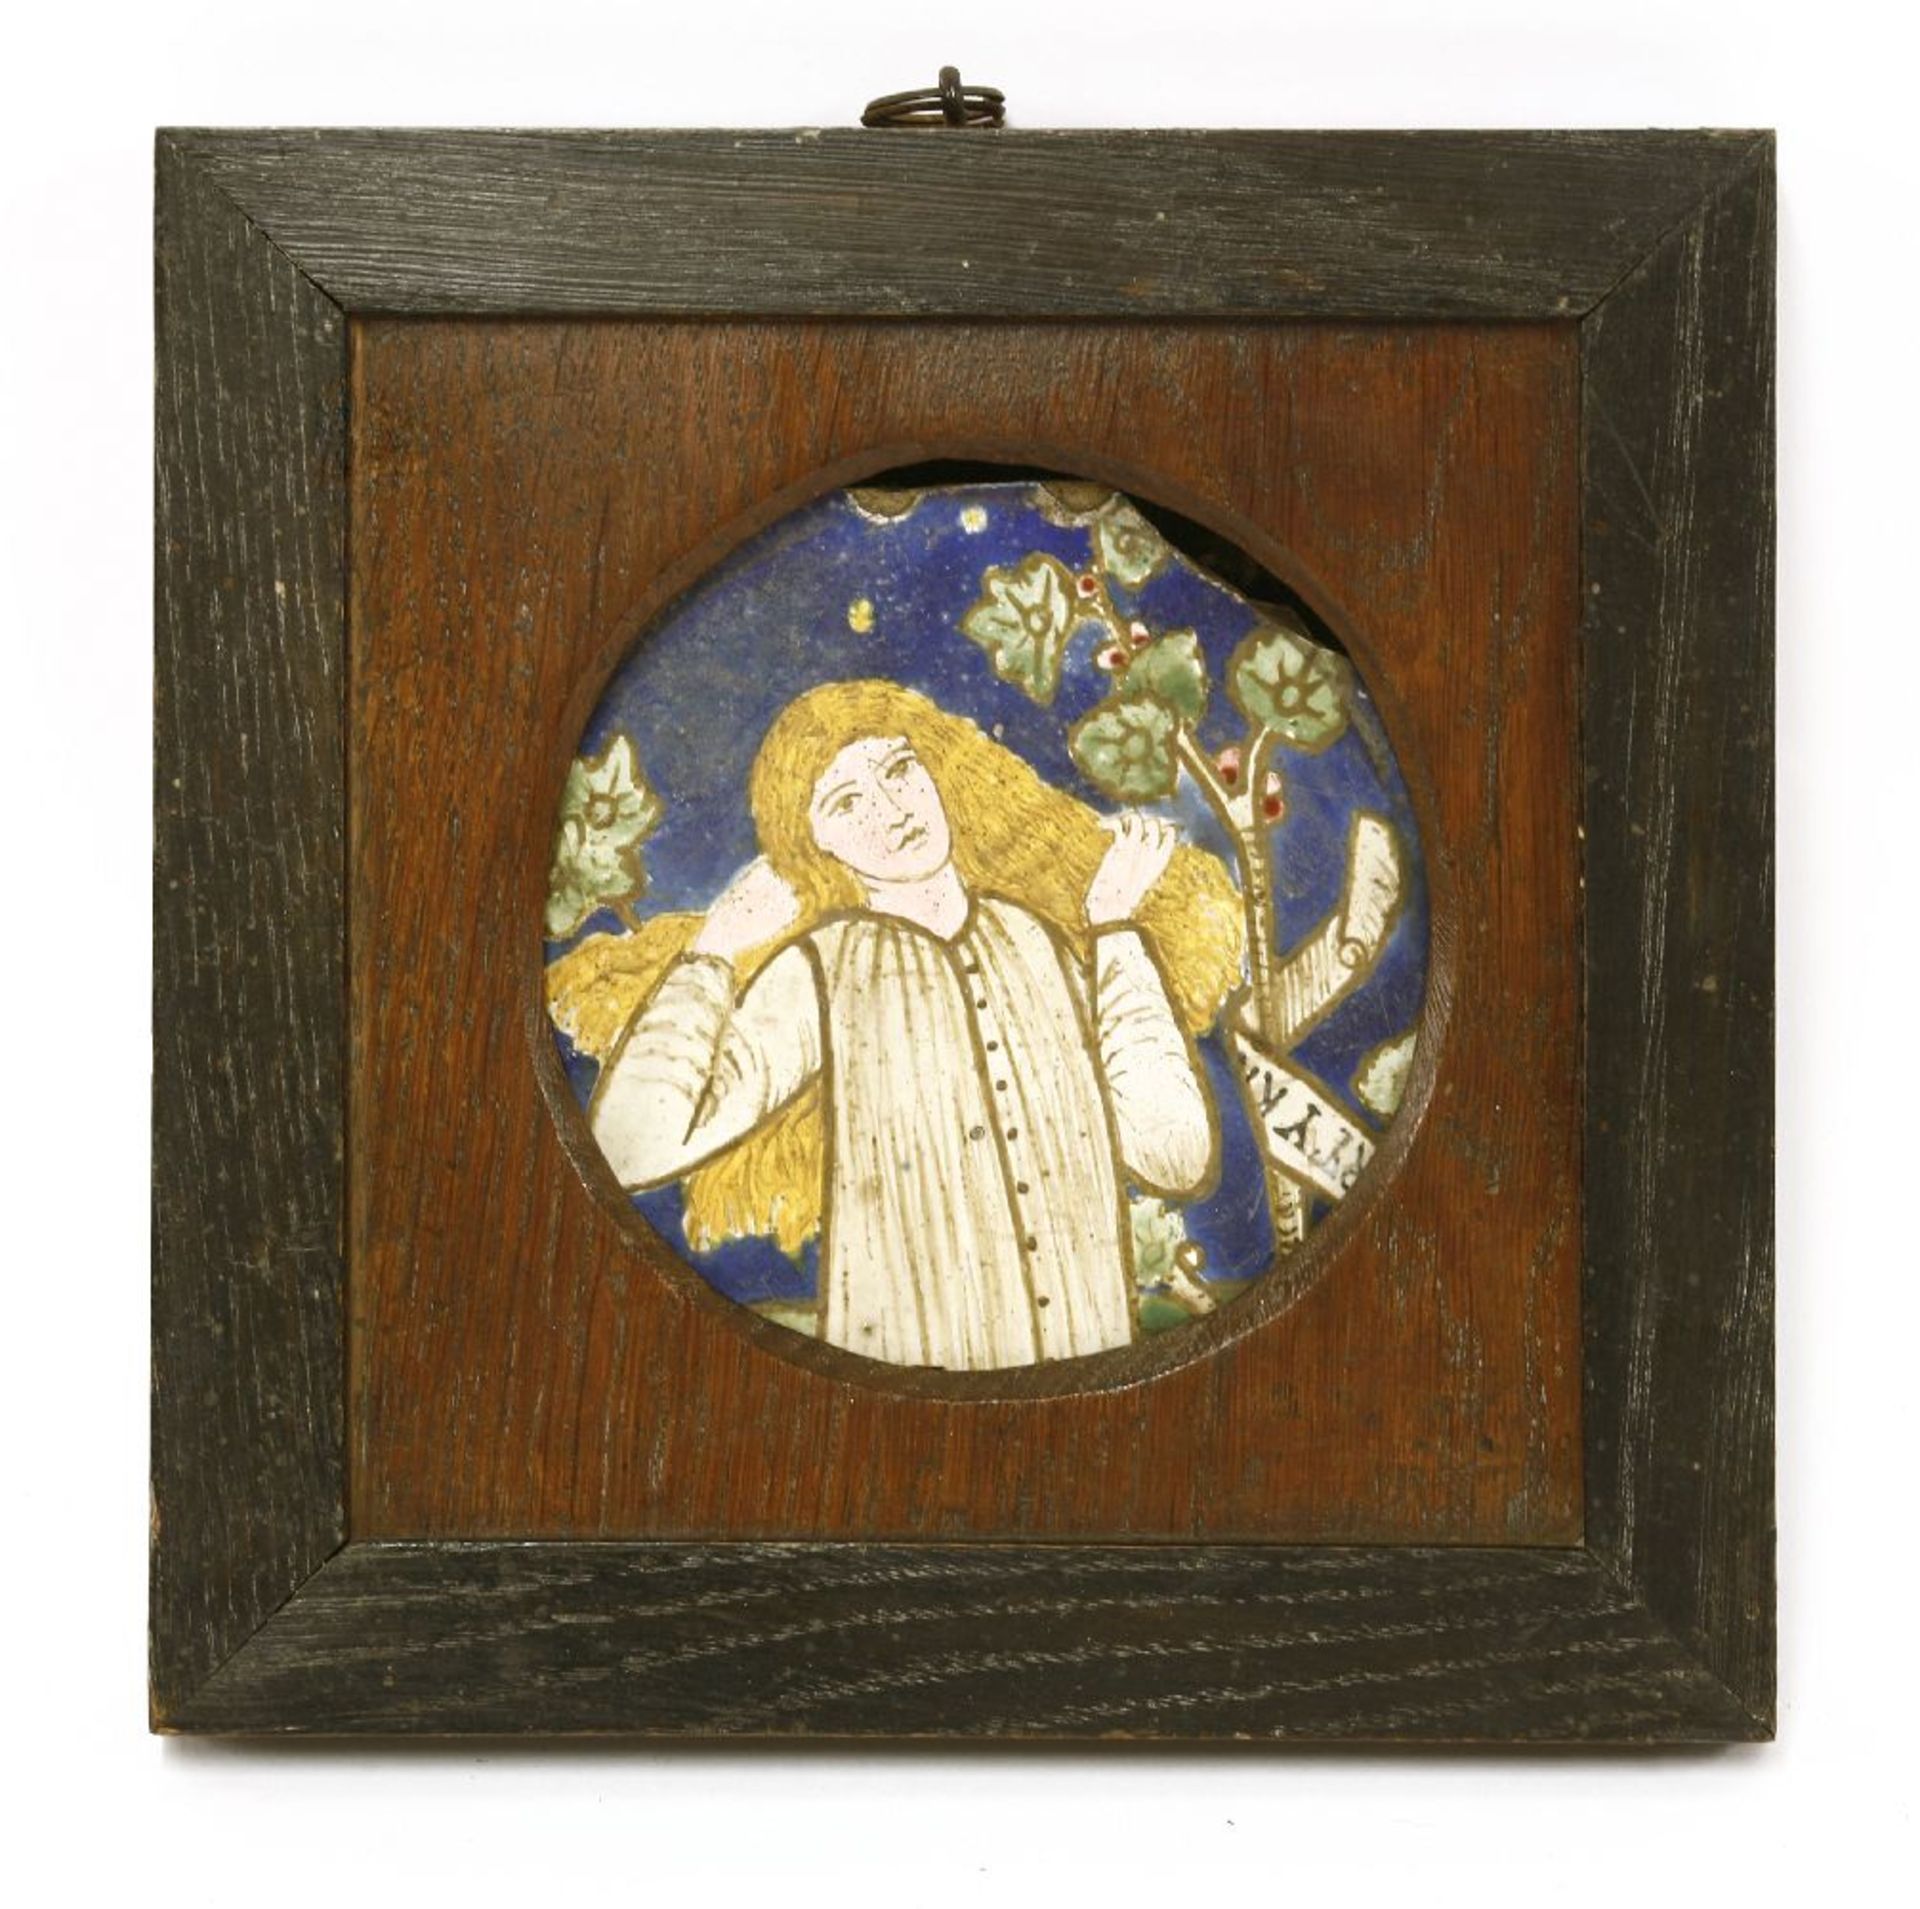 A Morris & Co. tile fragment depicting Thisbe,designed by Edward Burne-Jones in 1861-62, from